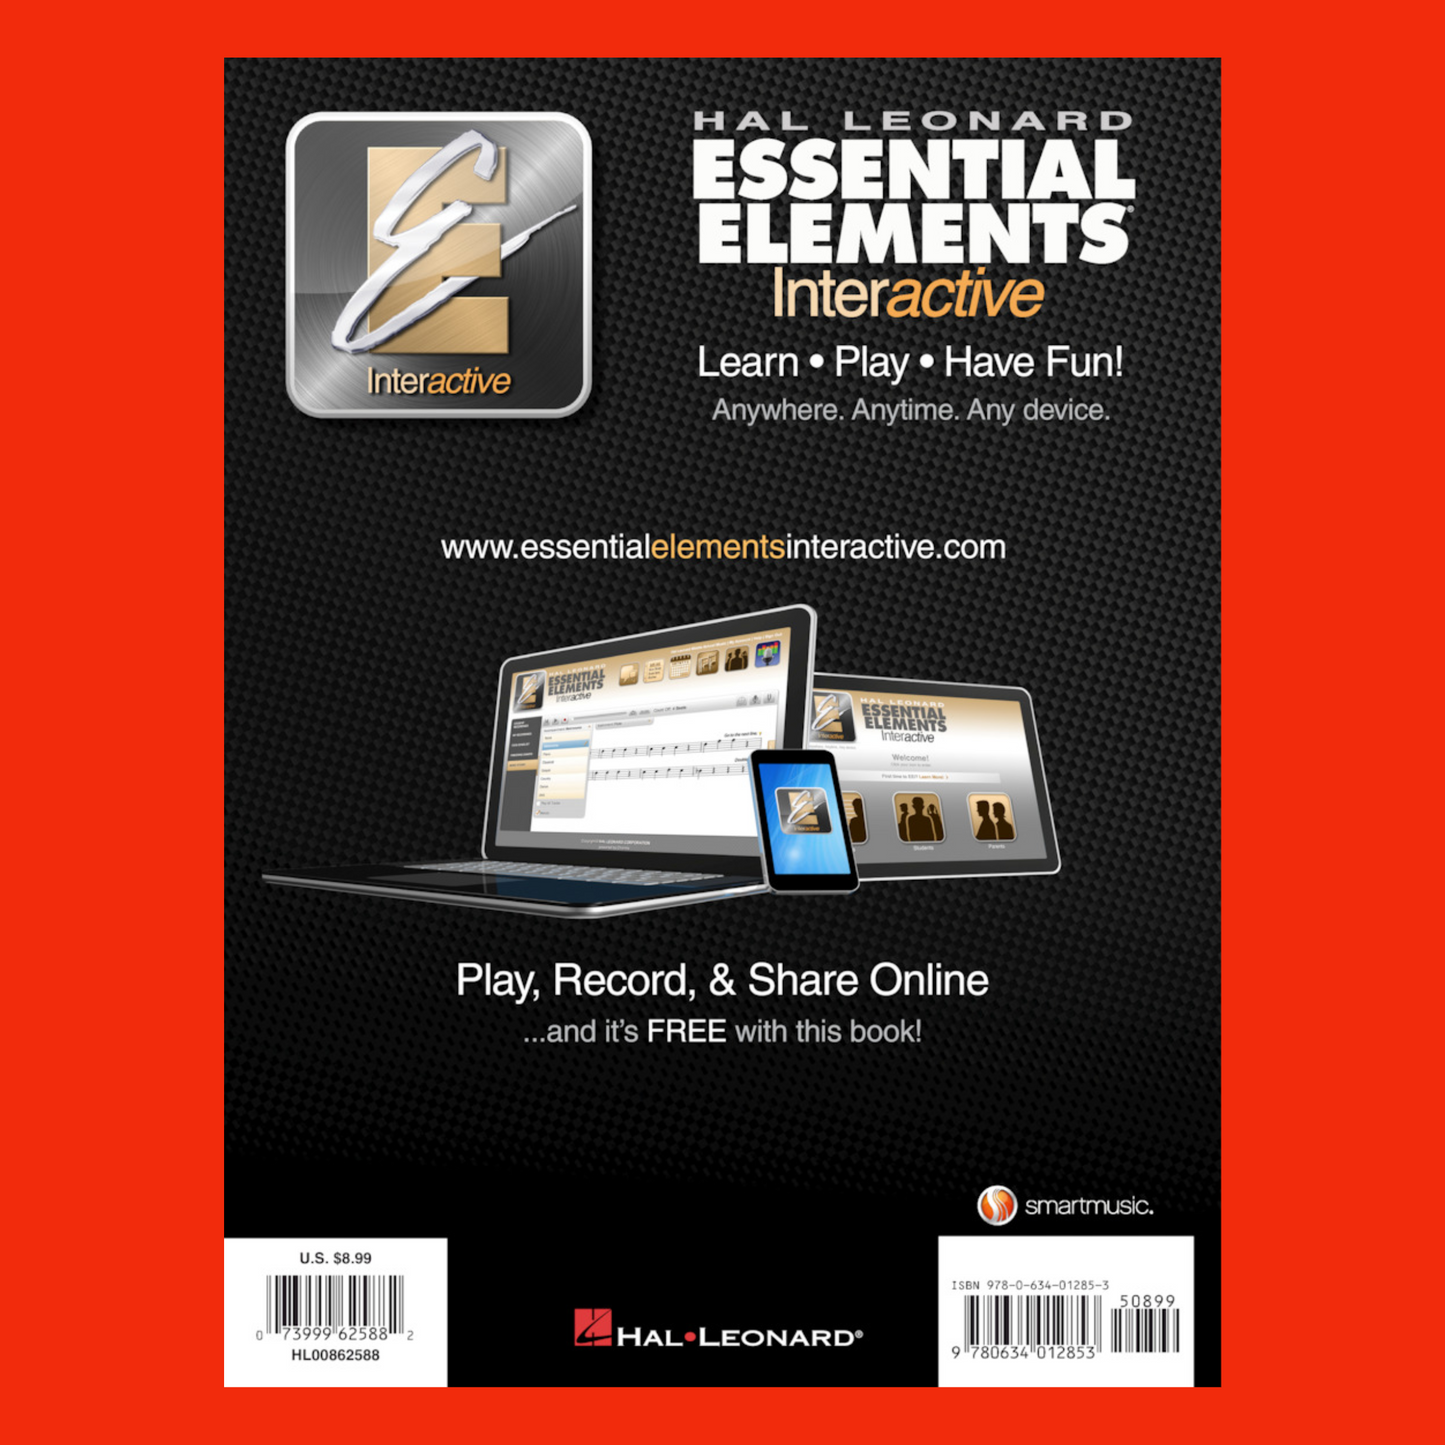 Essential Elements For Band - Flute Book 2 (Book & EEi)